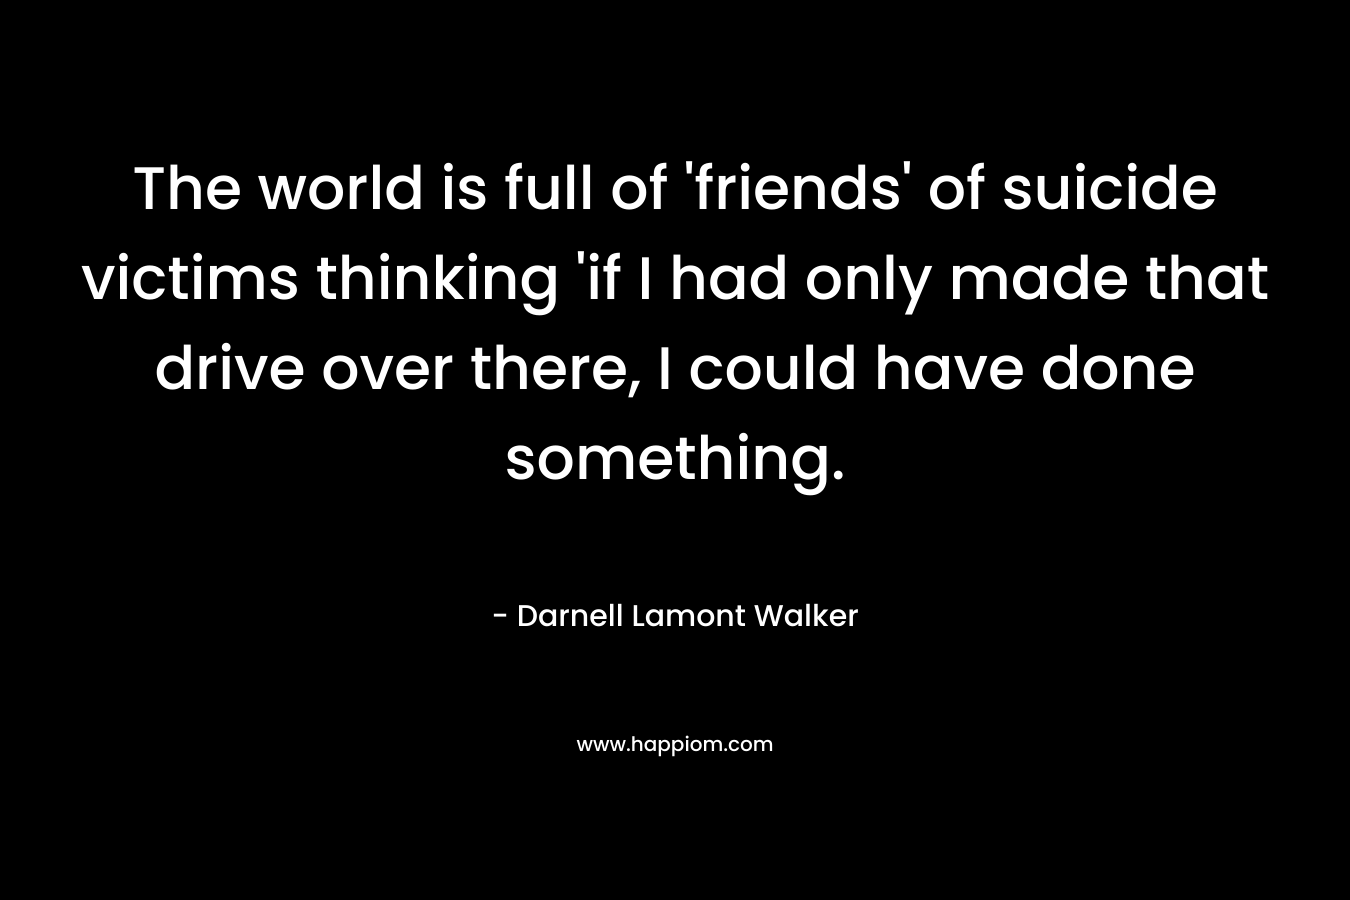 The world is full of 'friends' of suicide victims thinking 'if I had only made that drive over there, I could have done something.